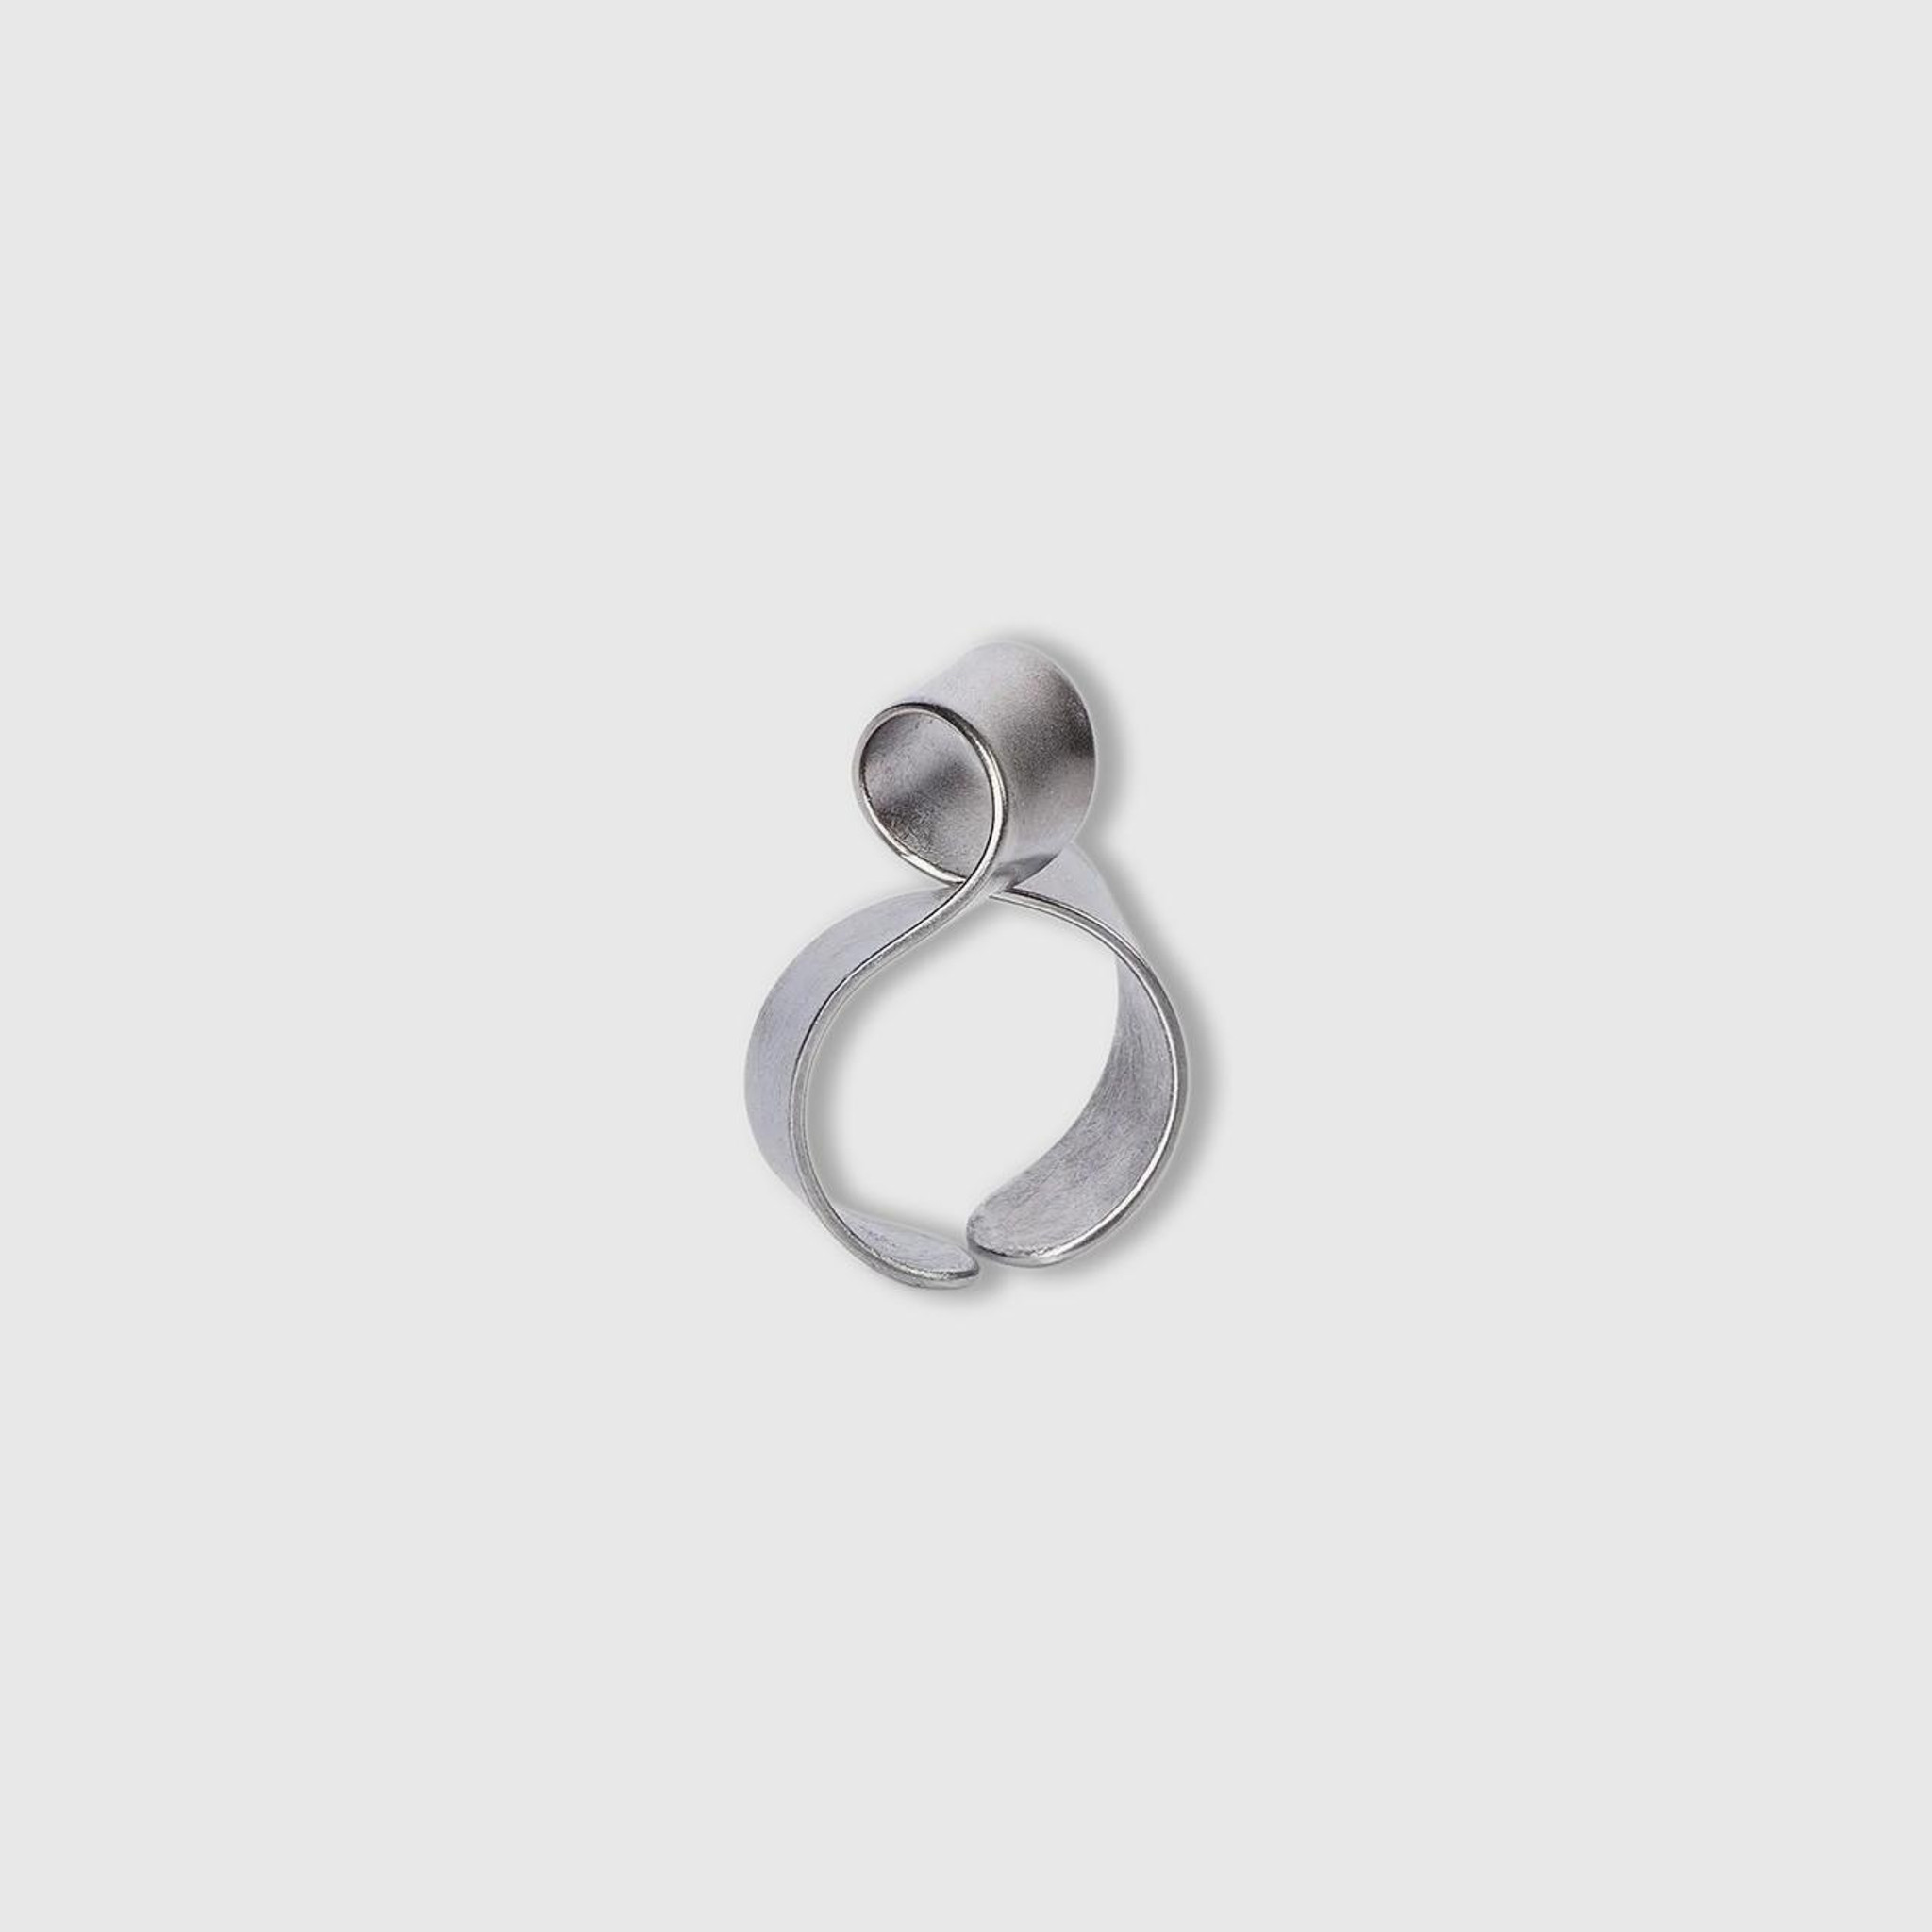 High Twist Ring, Stainless Steel, Mysterium Collection, Handmade in Poland, Sculptural Jewelry